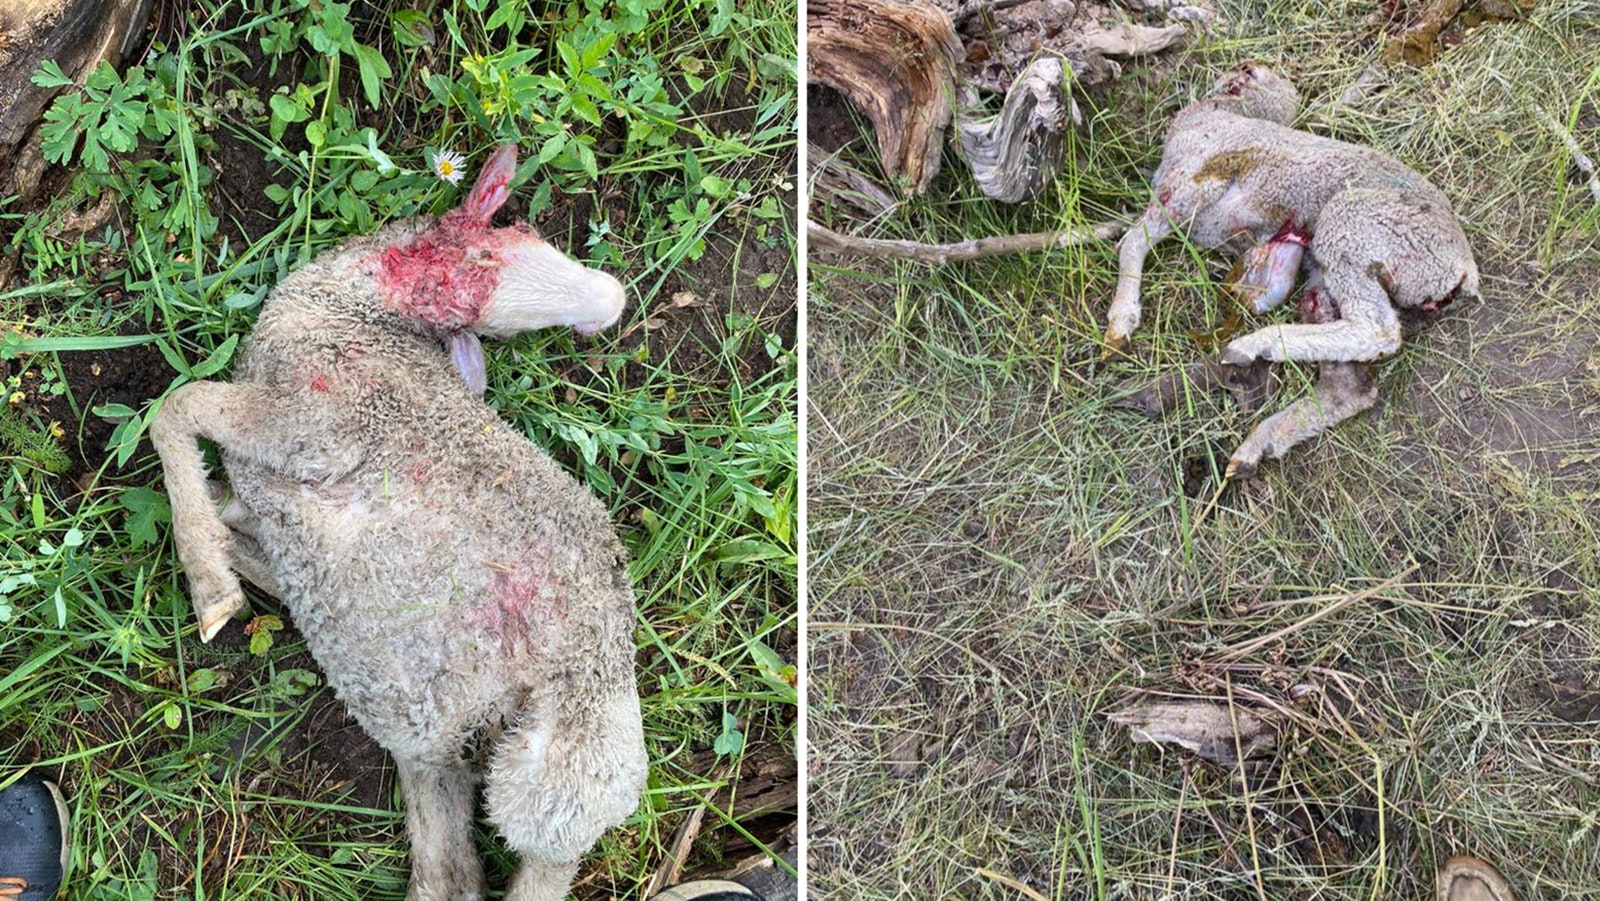 Sheep killed by grizzlies.